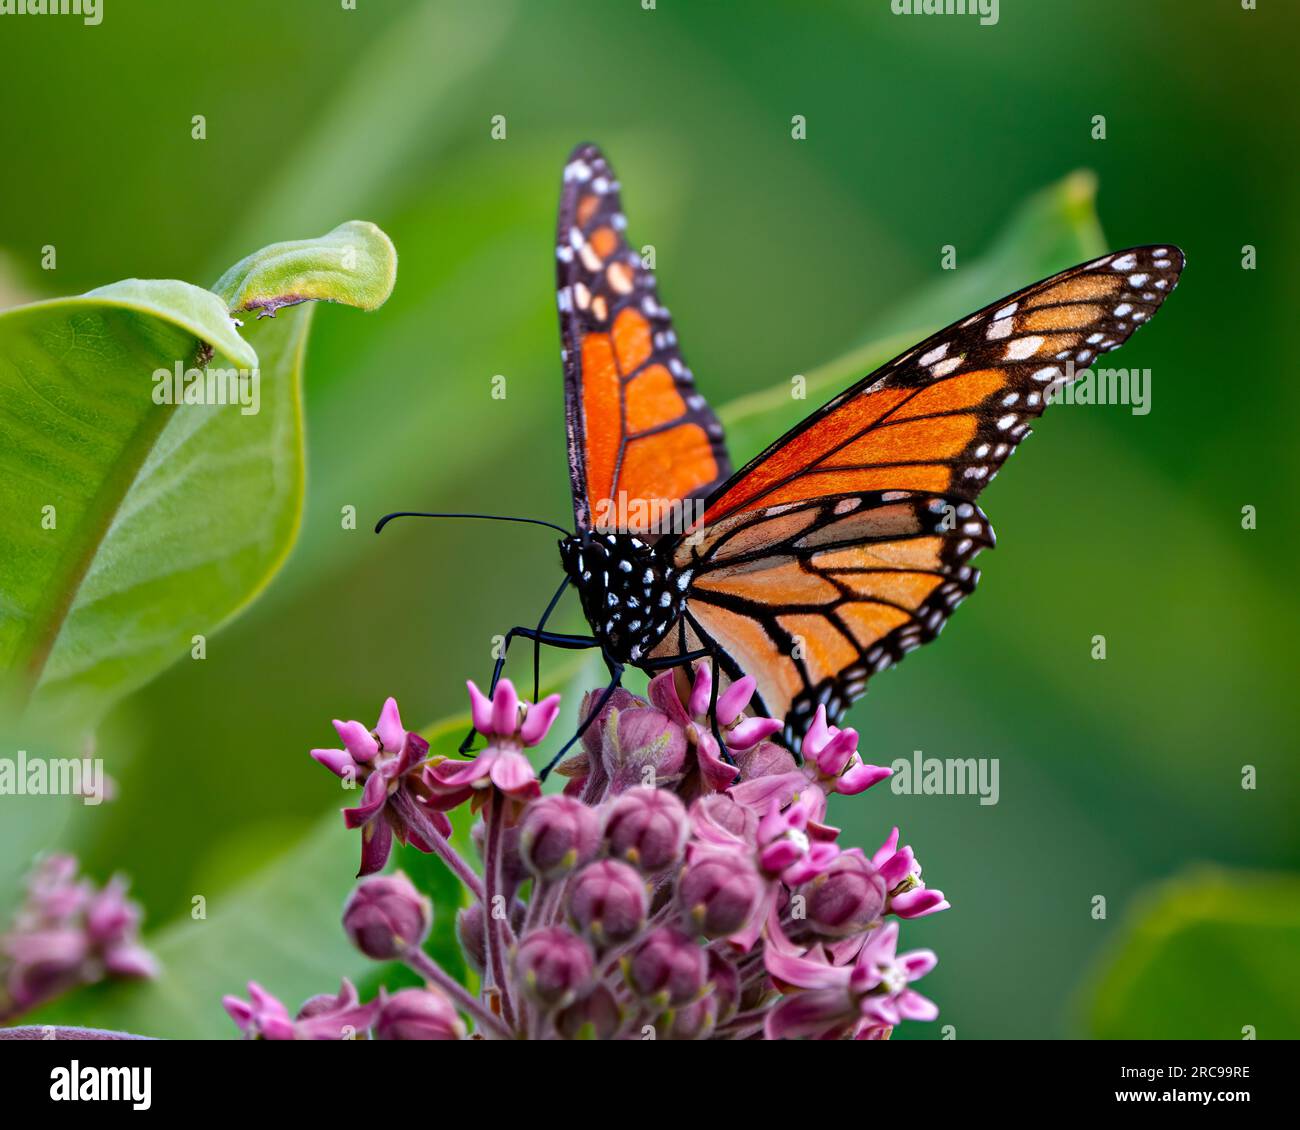 Monarch Butterfly sipping or drinking nectar from a milkweed plant with a blur green background in its environment and habitat surrounding. Butterfly. Stock Photo